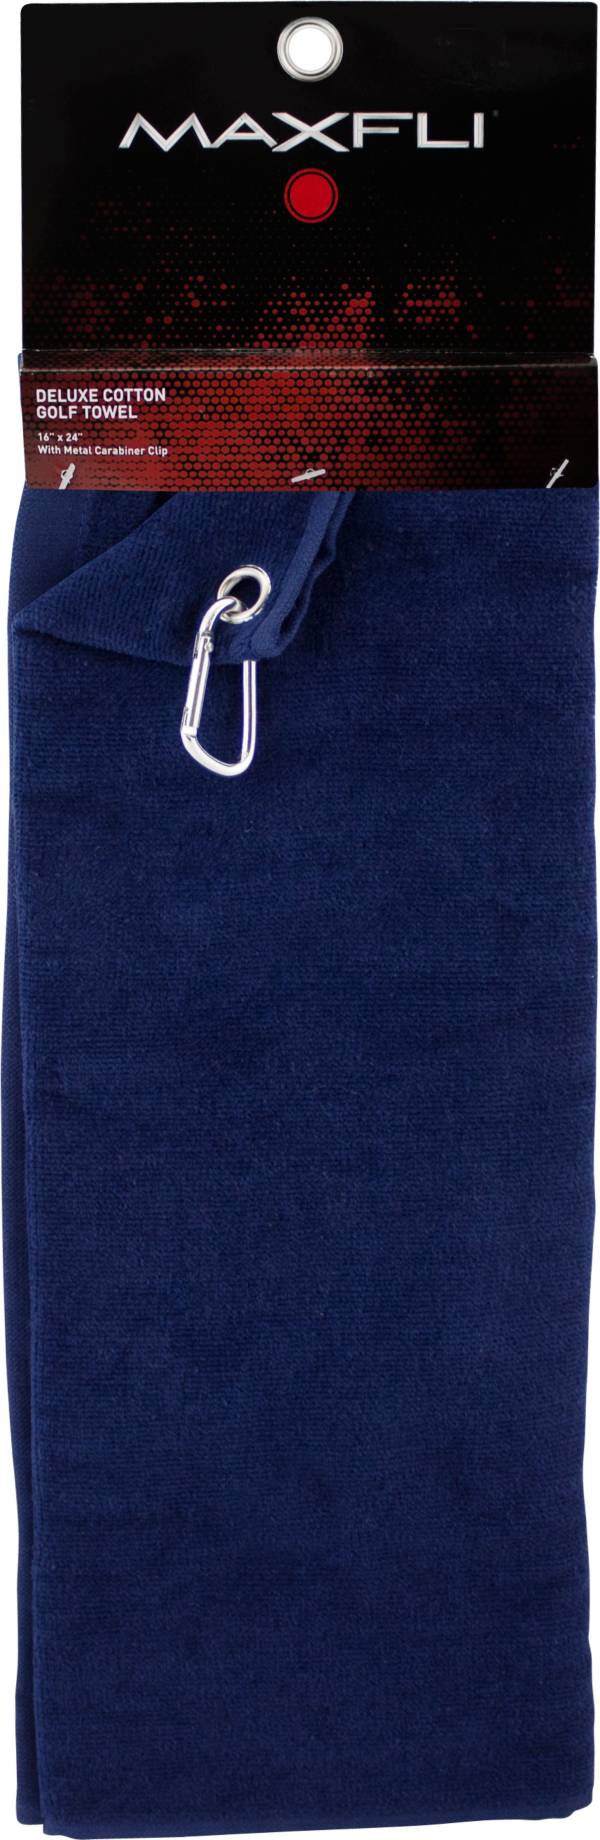 Maxfli Deluxe Cotton Golf Towel product image